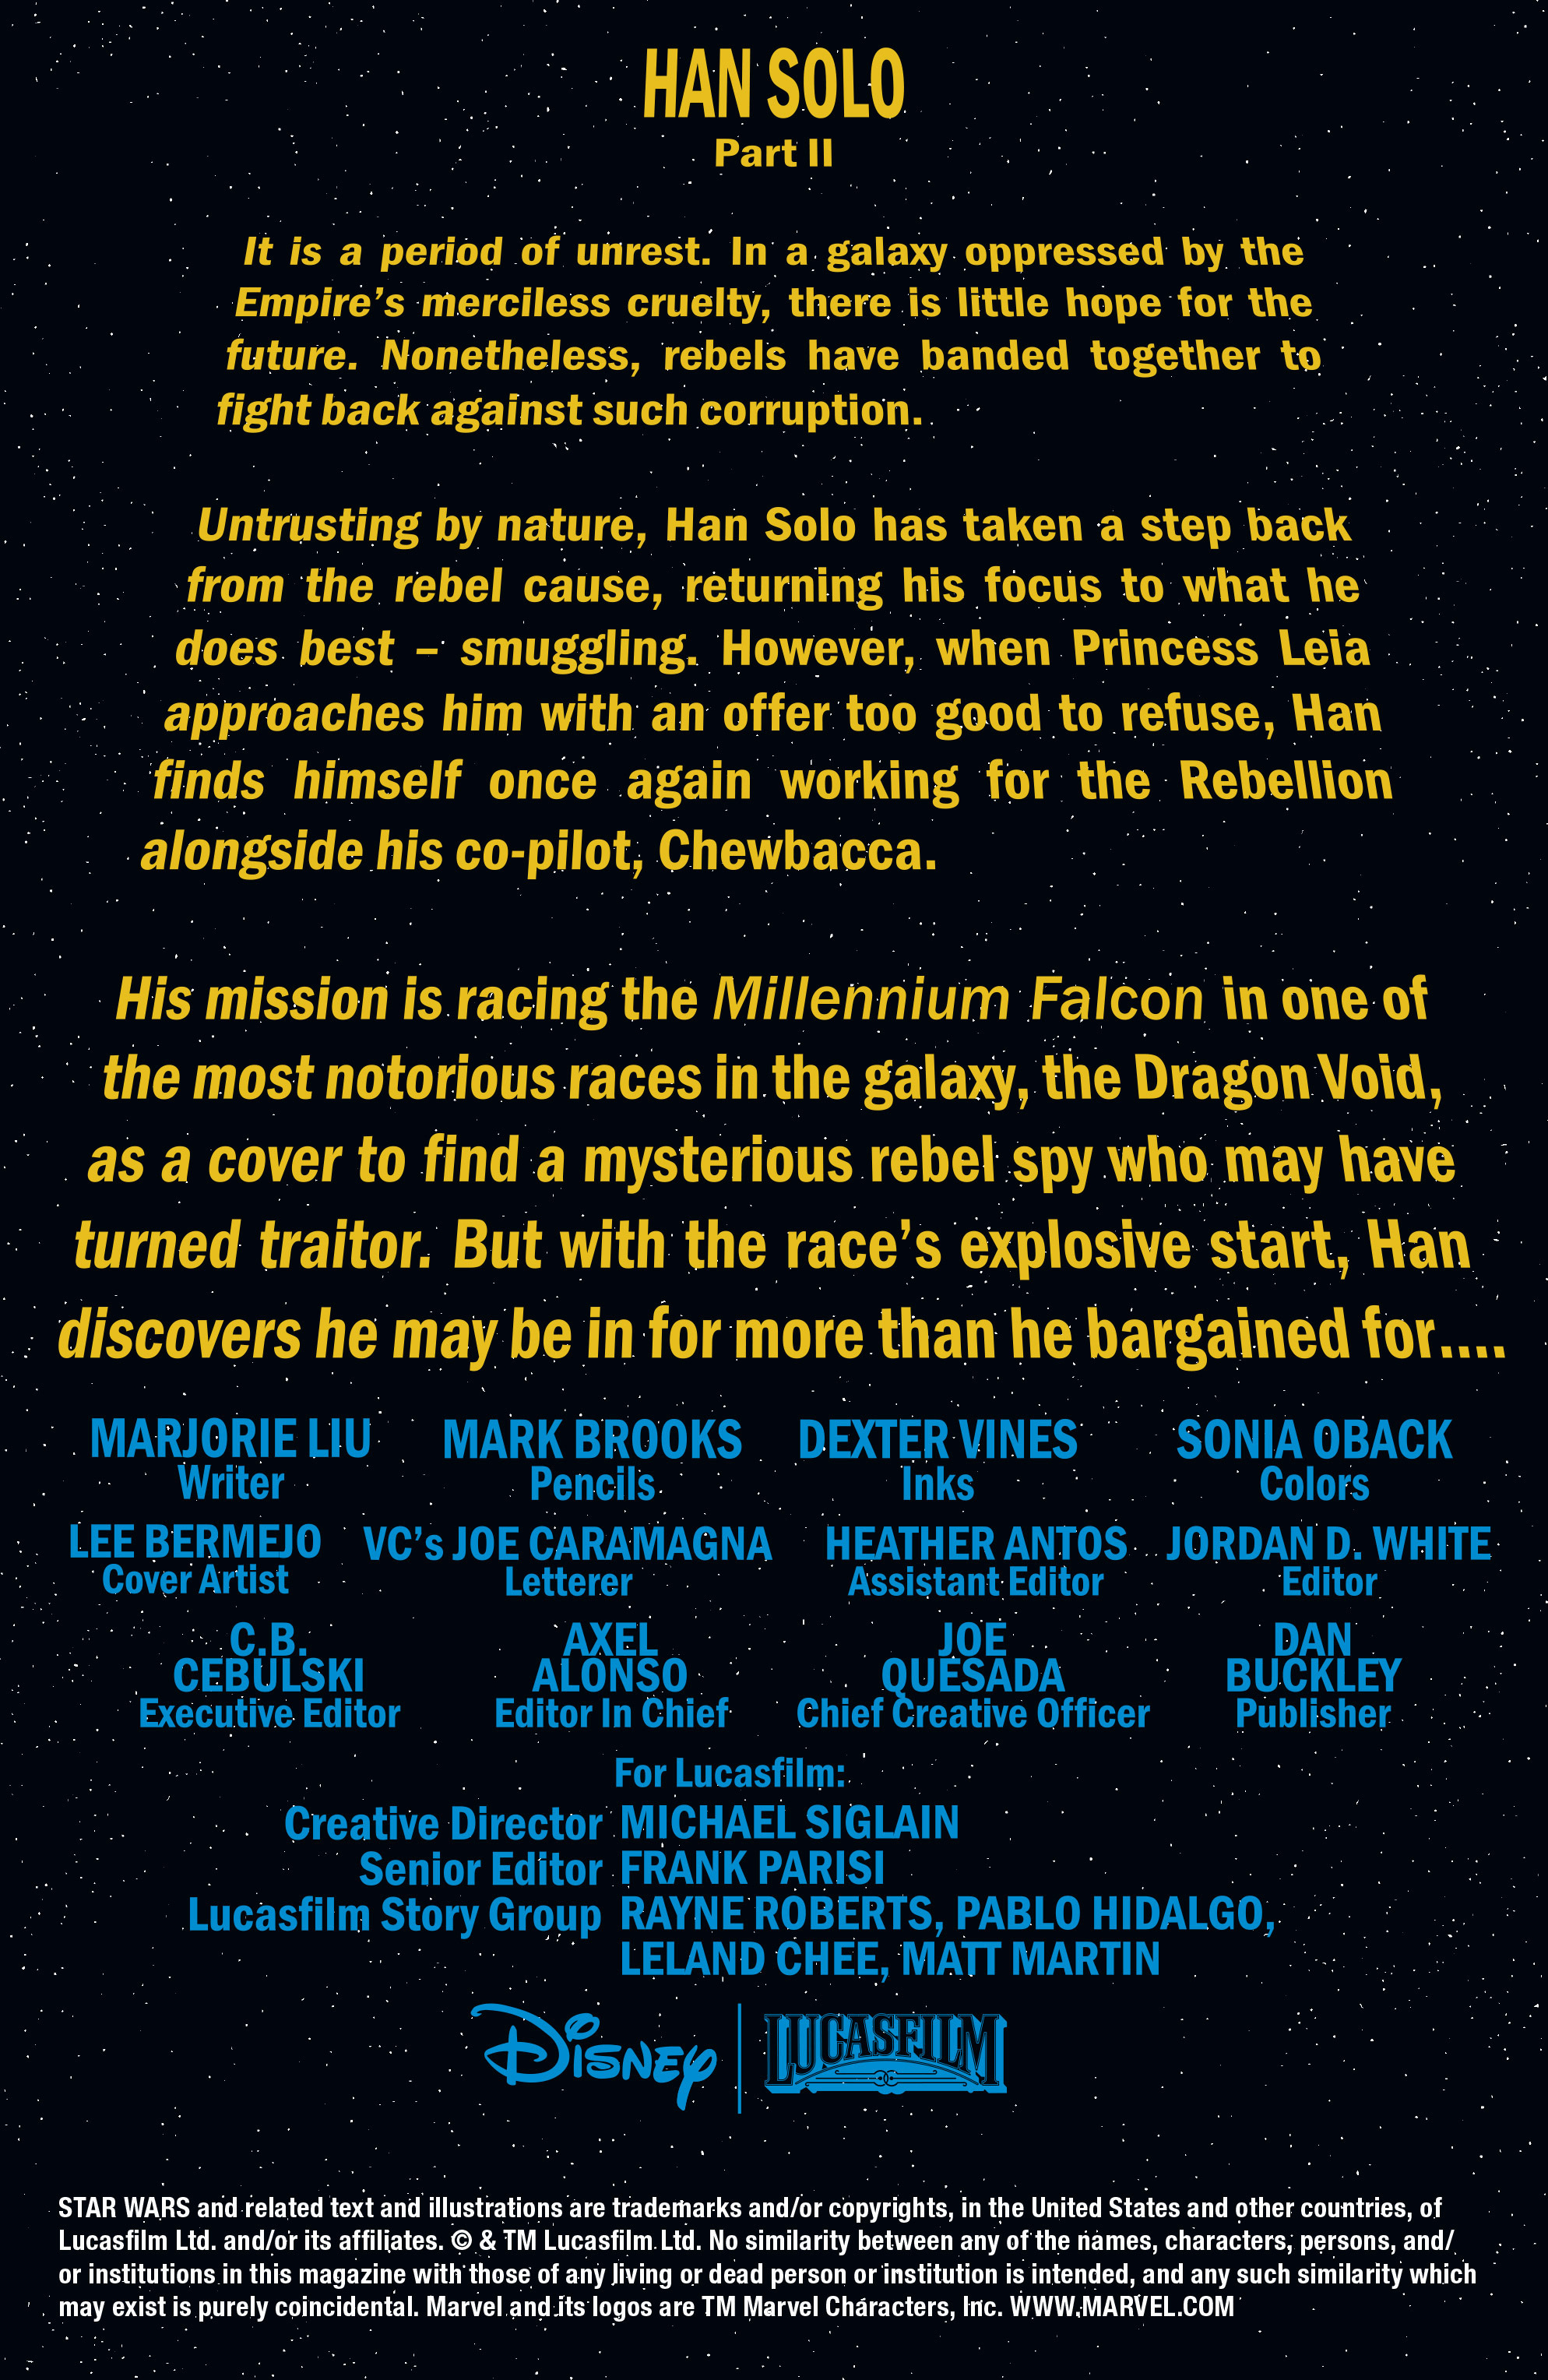 Read online Han Solo comic -  Issue #2 - 5